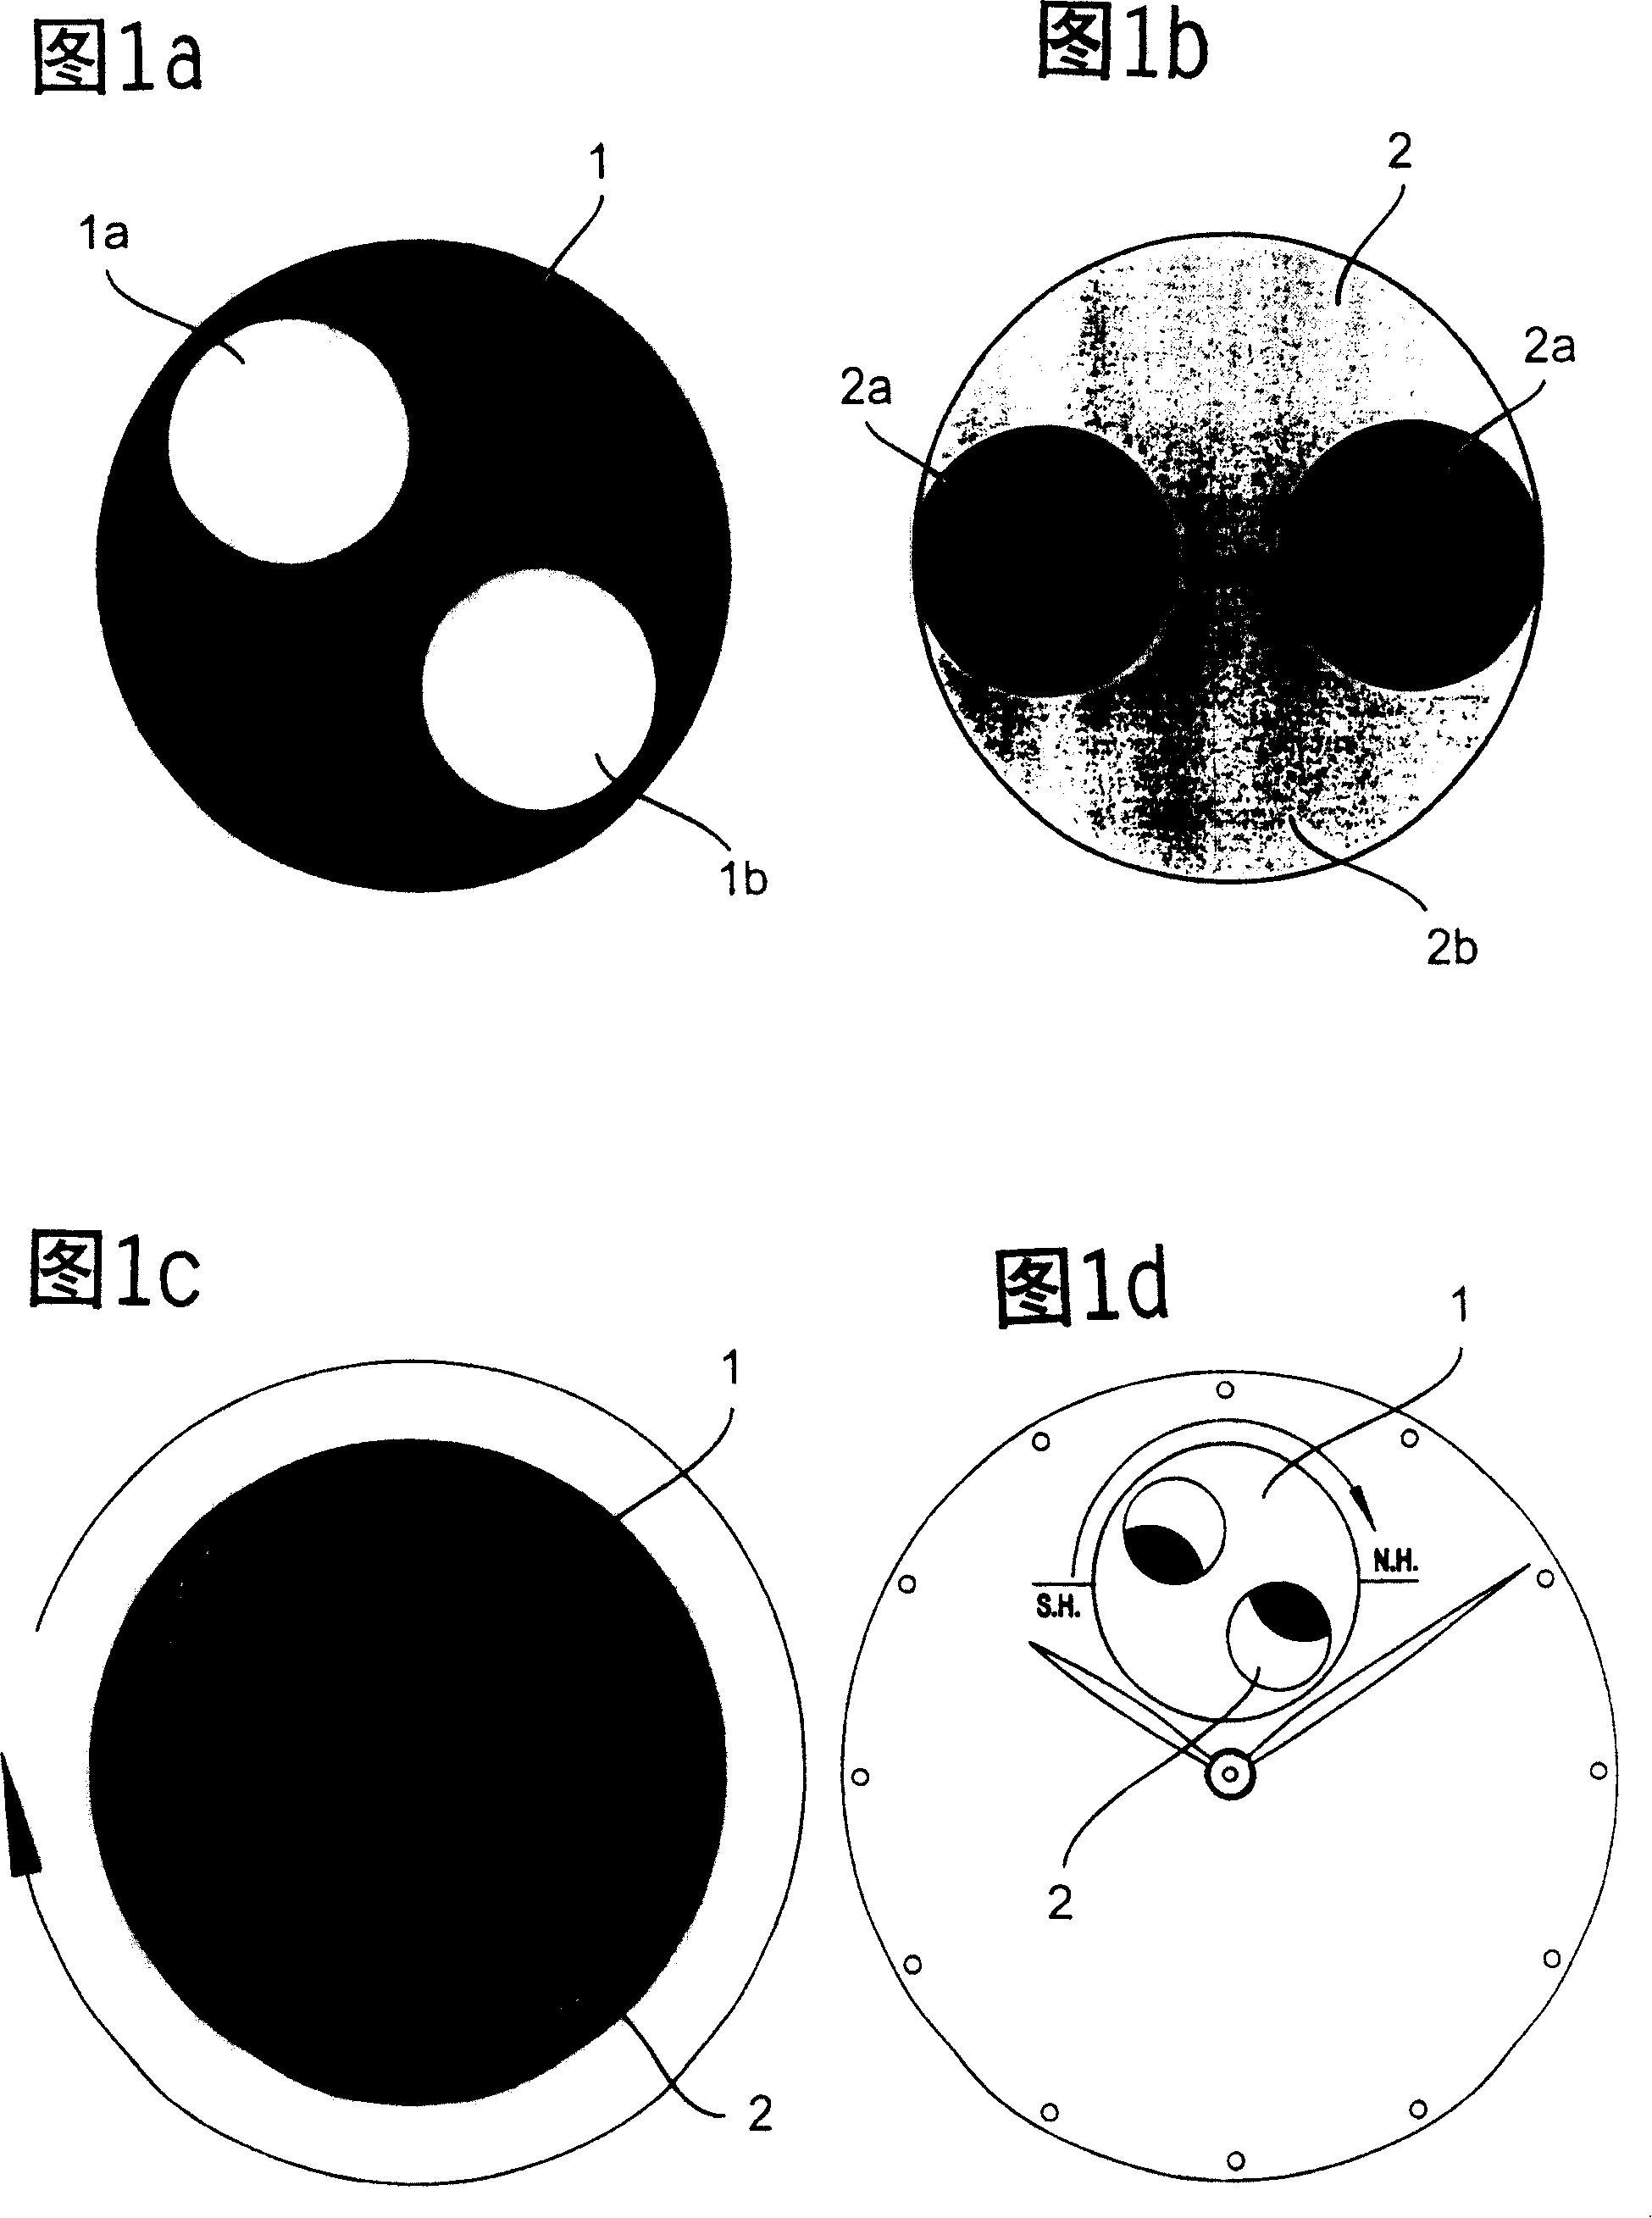 Mechanism for indicating moon pictures